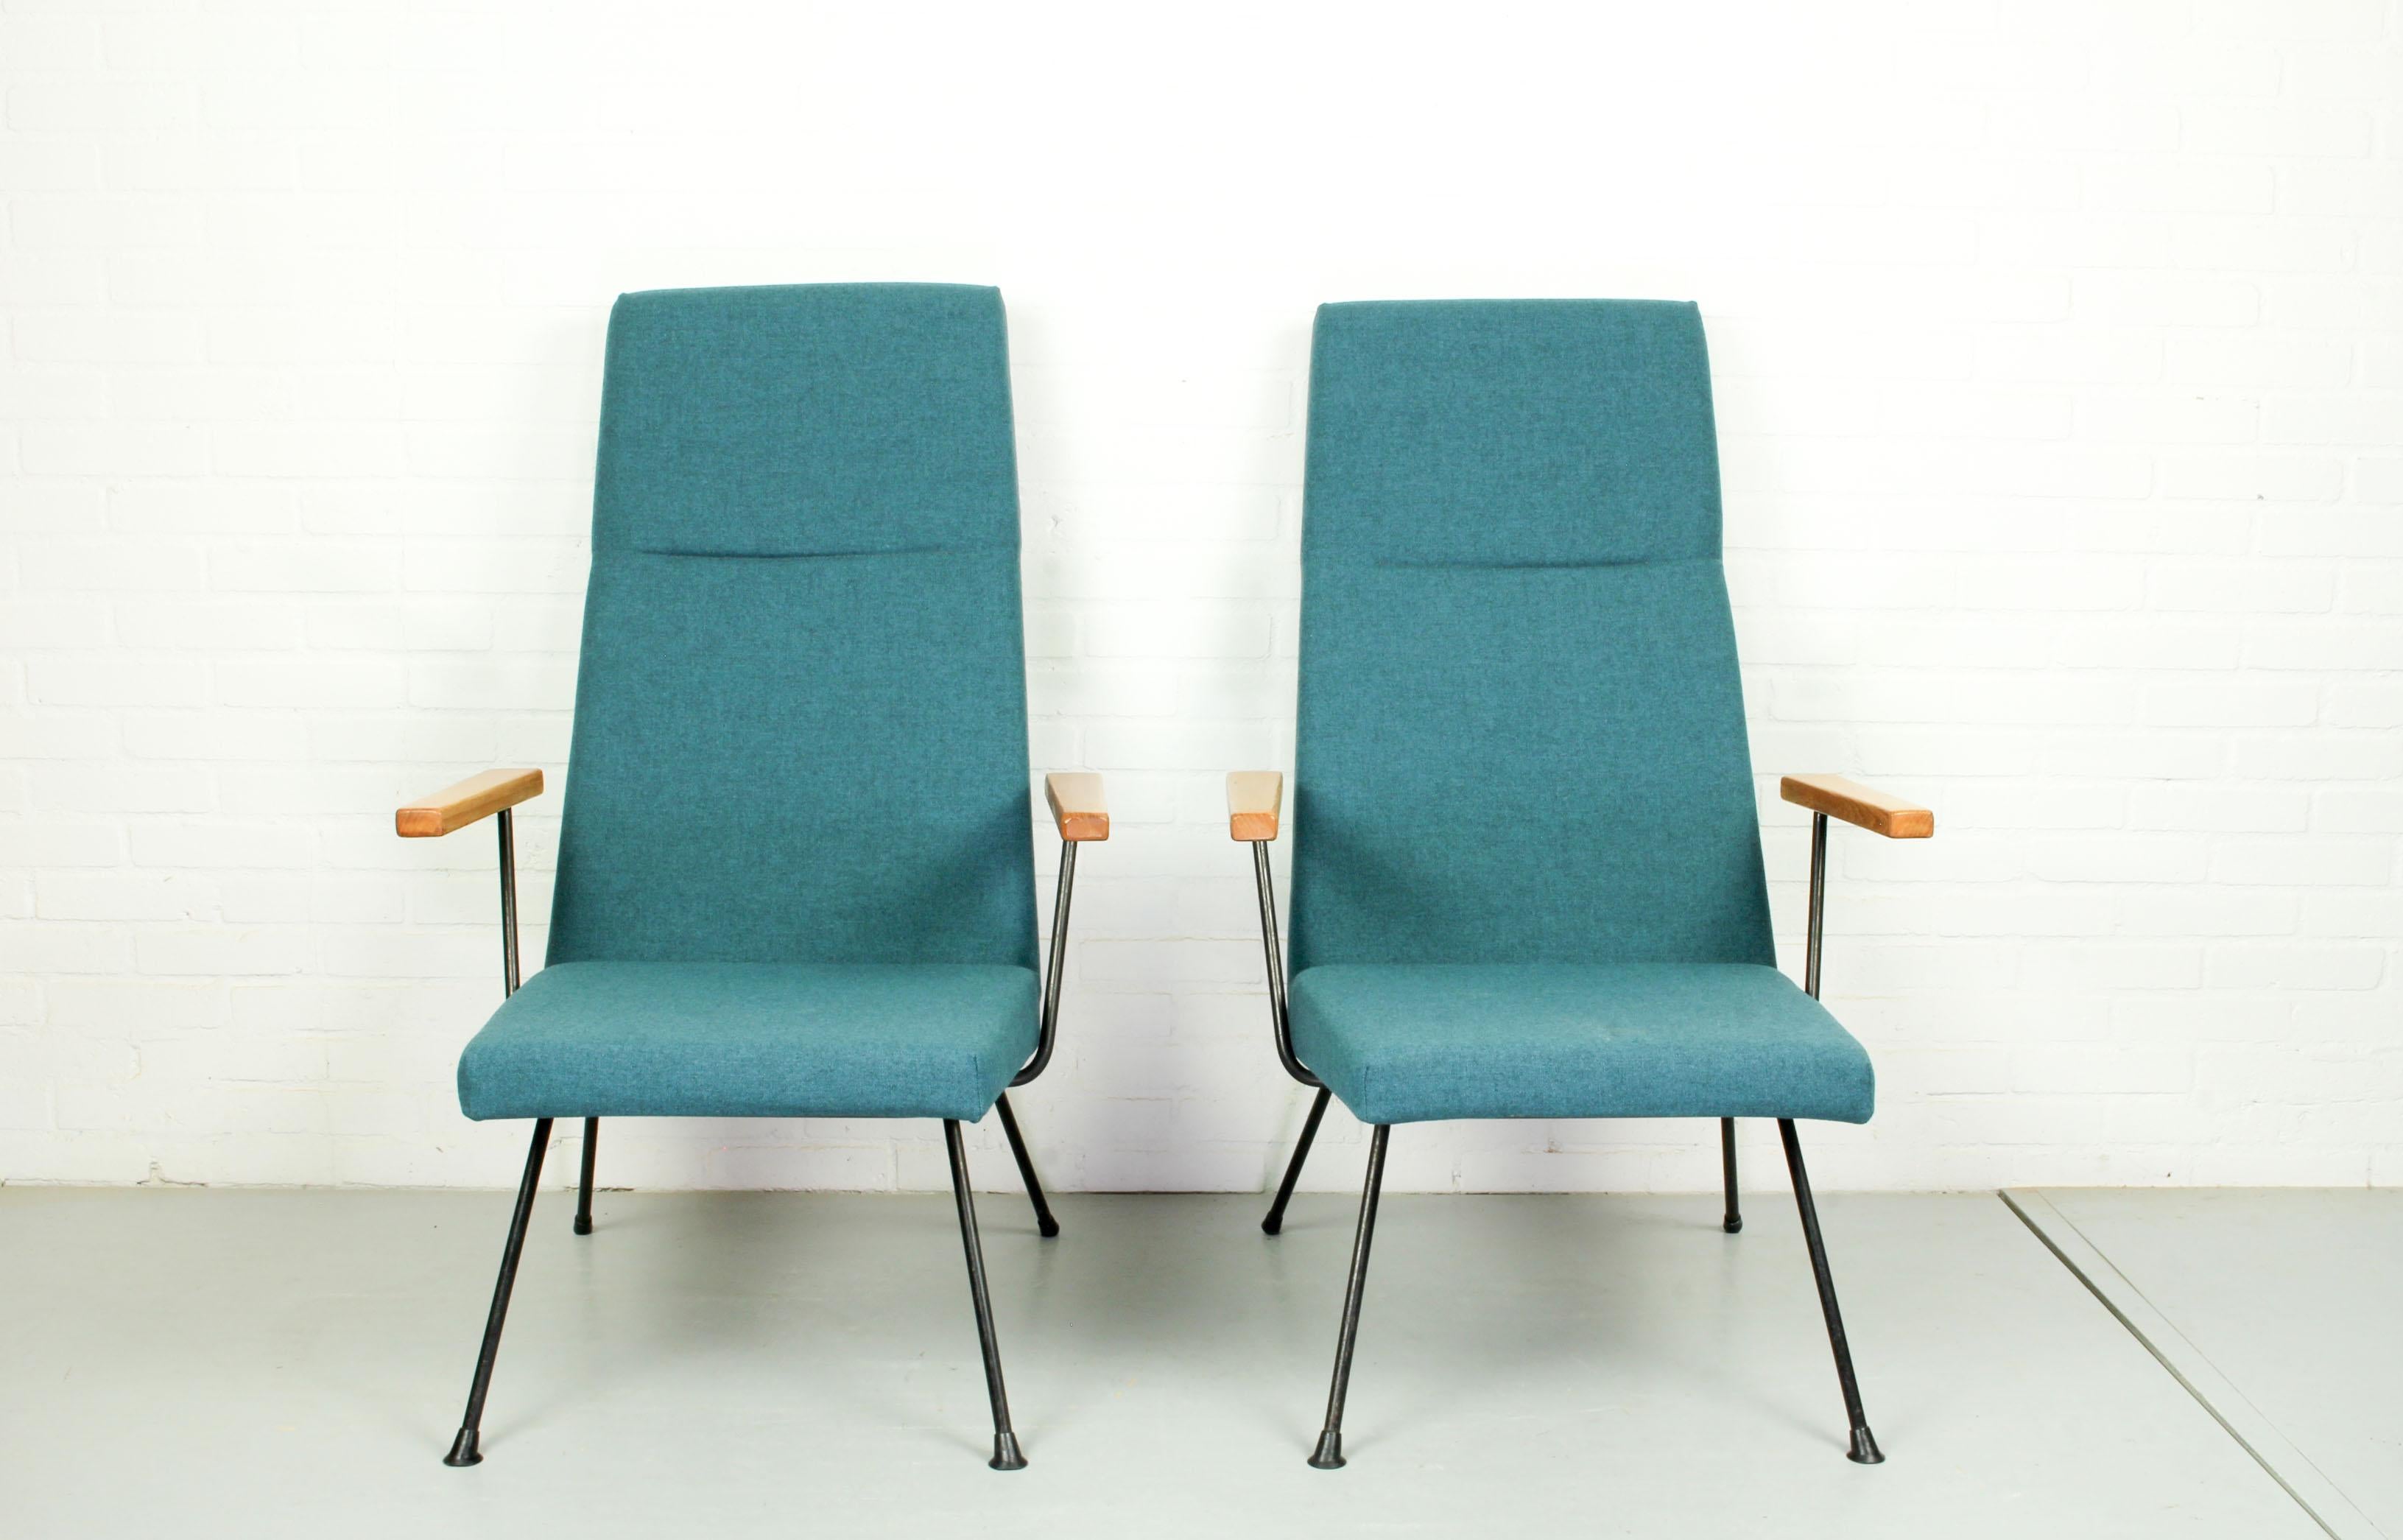 20th Century Set of Two A.R. Cordemeyer Lounge Chair Model 1410 by Gispen, 1959